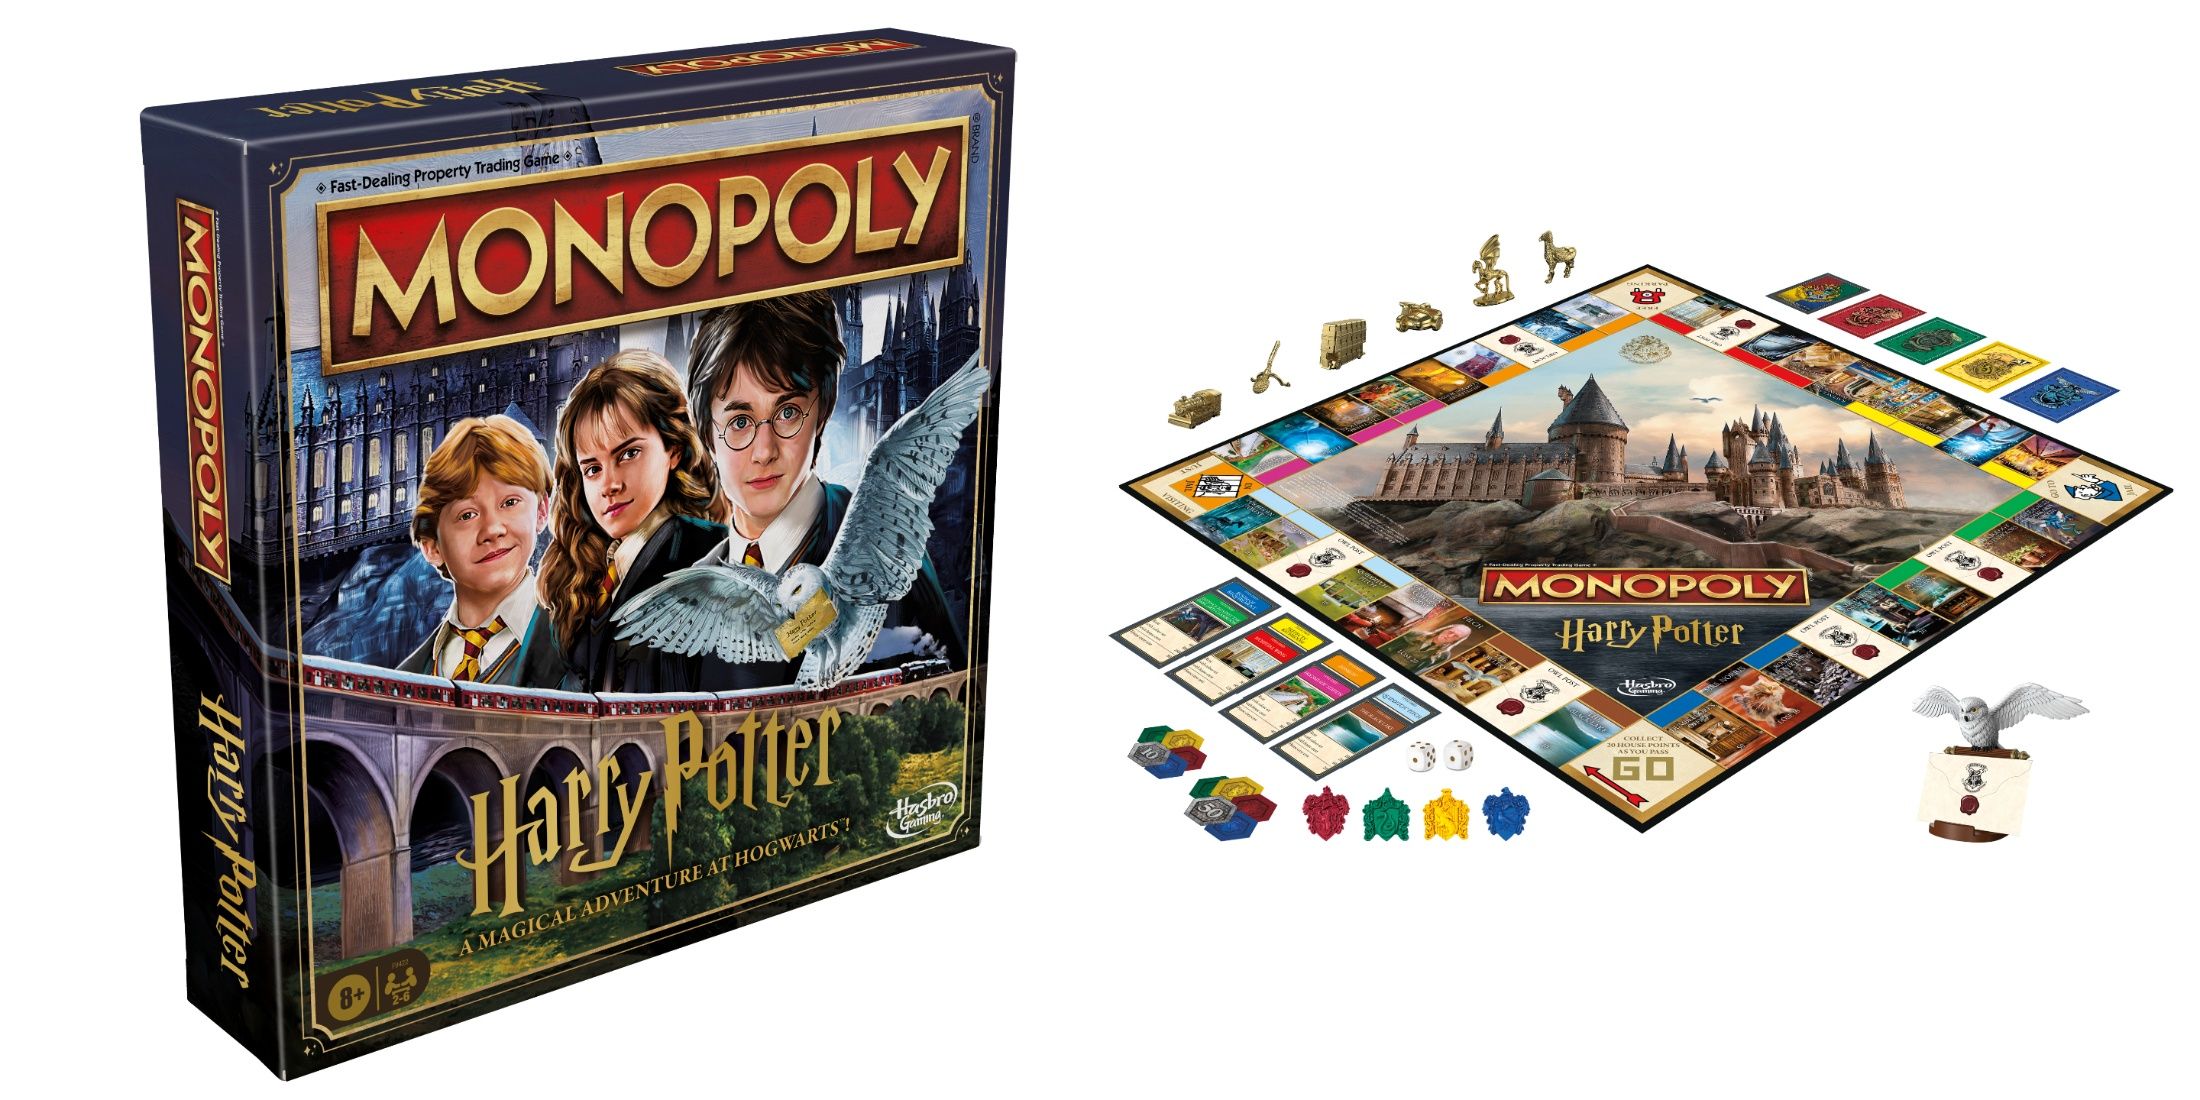 Monopoly Harry Potter edition collage